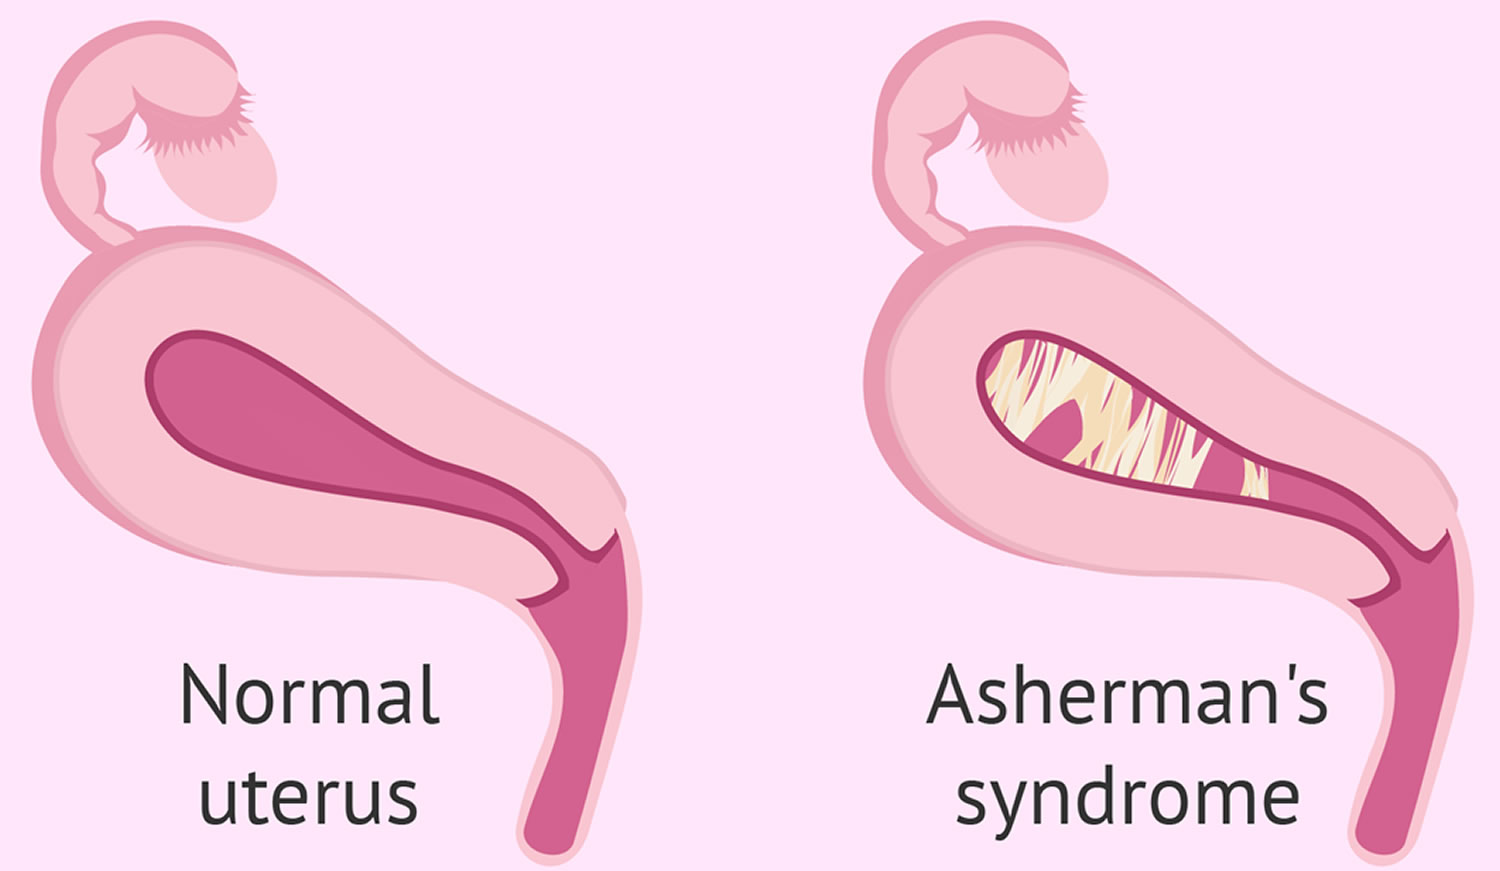 the presentation of asherman's syndrome typically involves